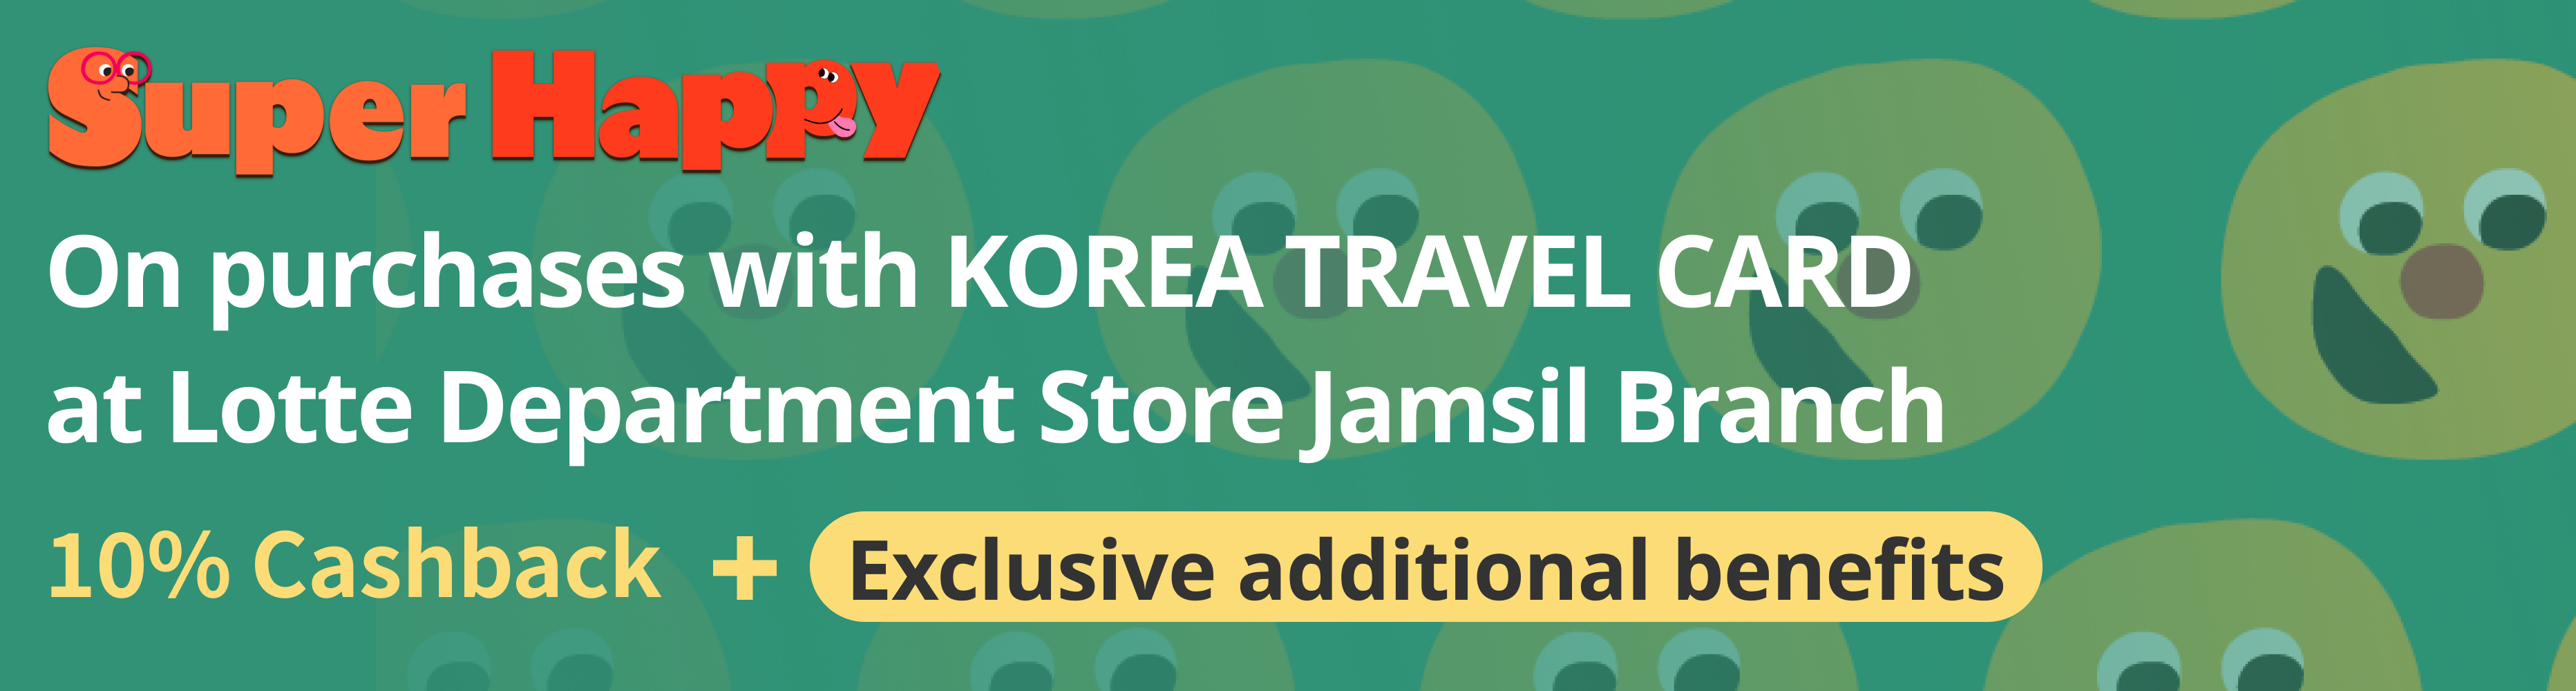 Lotte jamsil branch event!